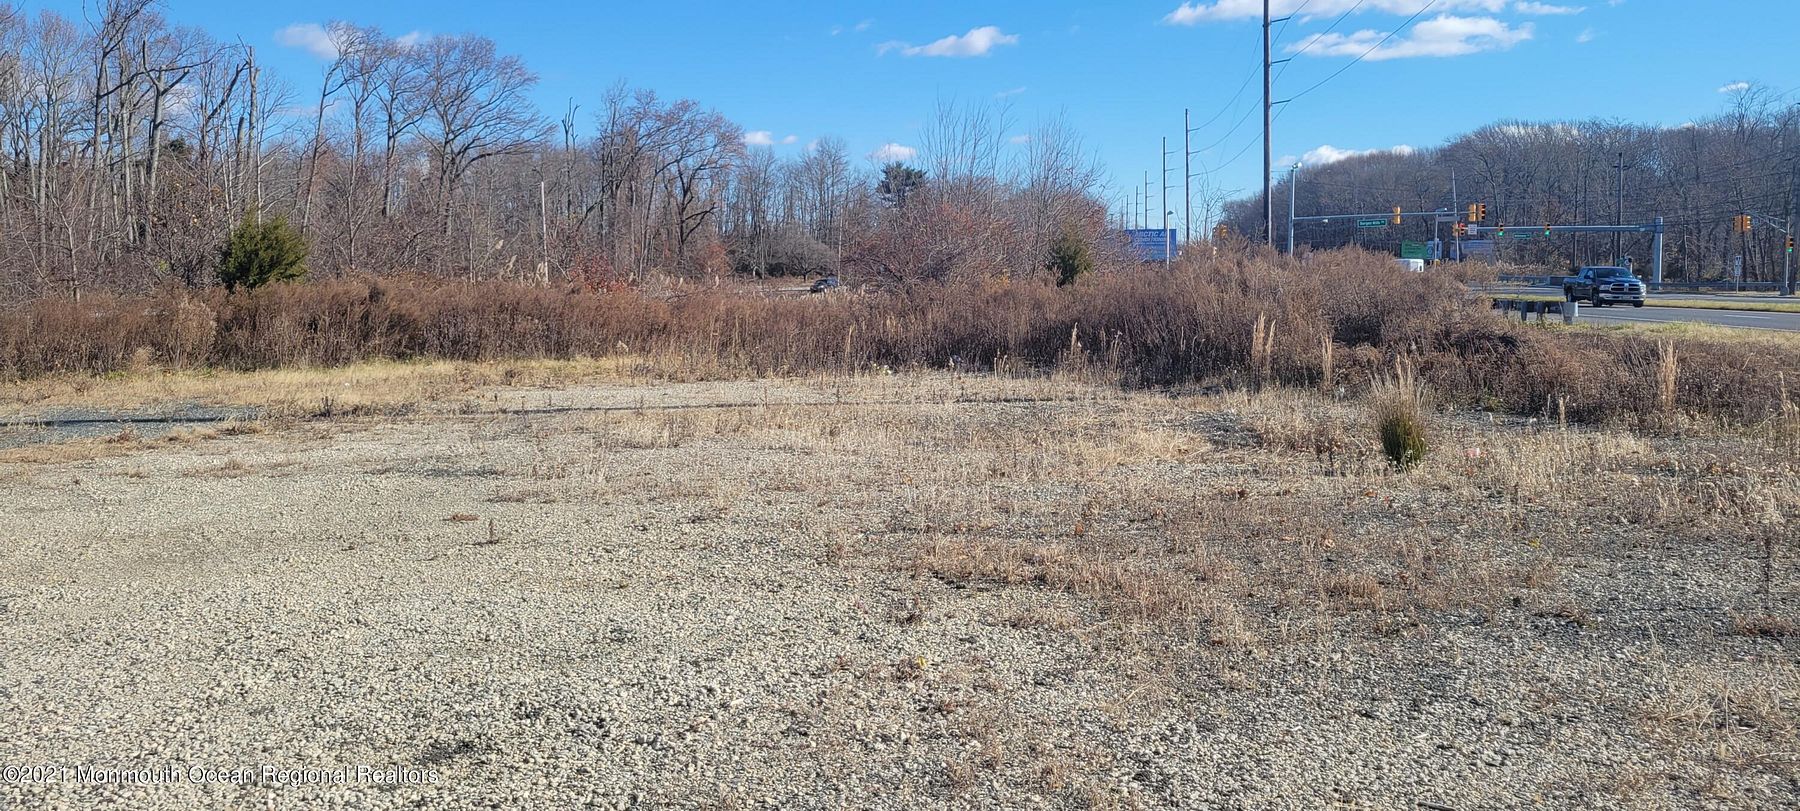 0.79 Acres of Commercial Land Millstone Township, New Jersey, NJ